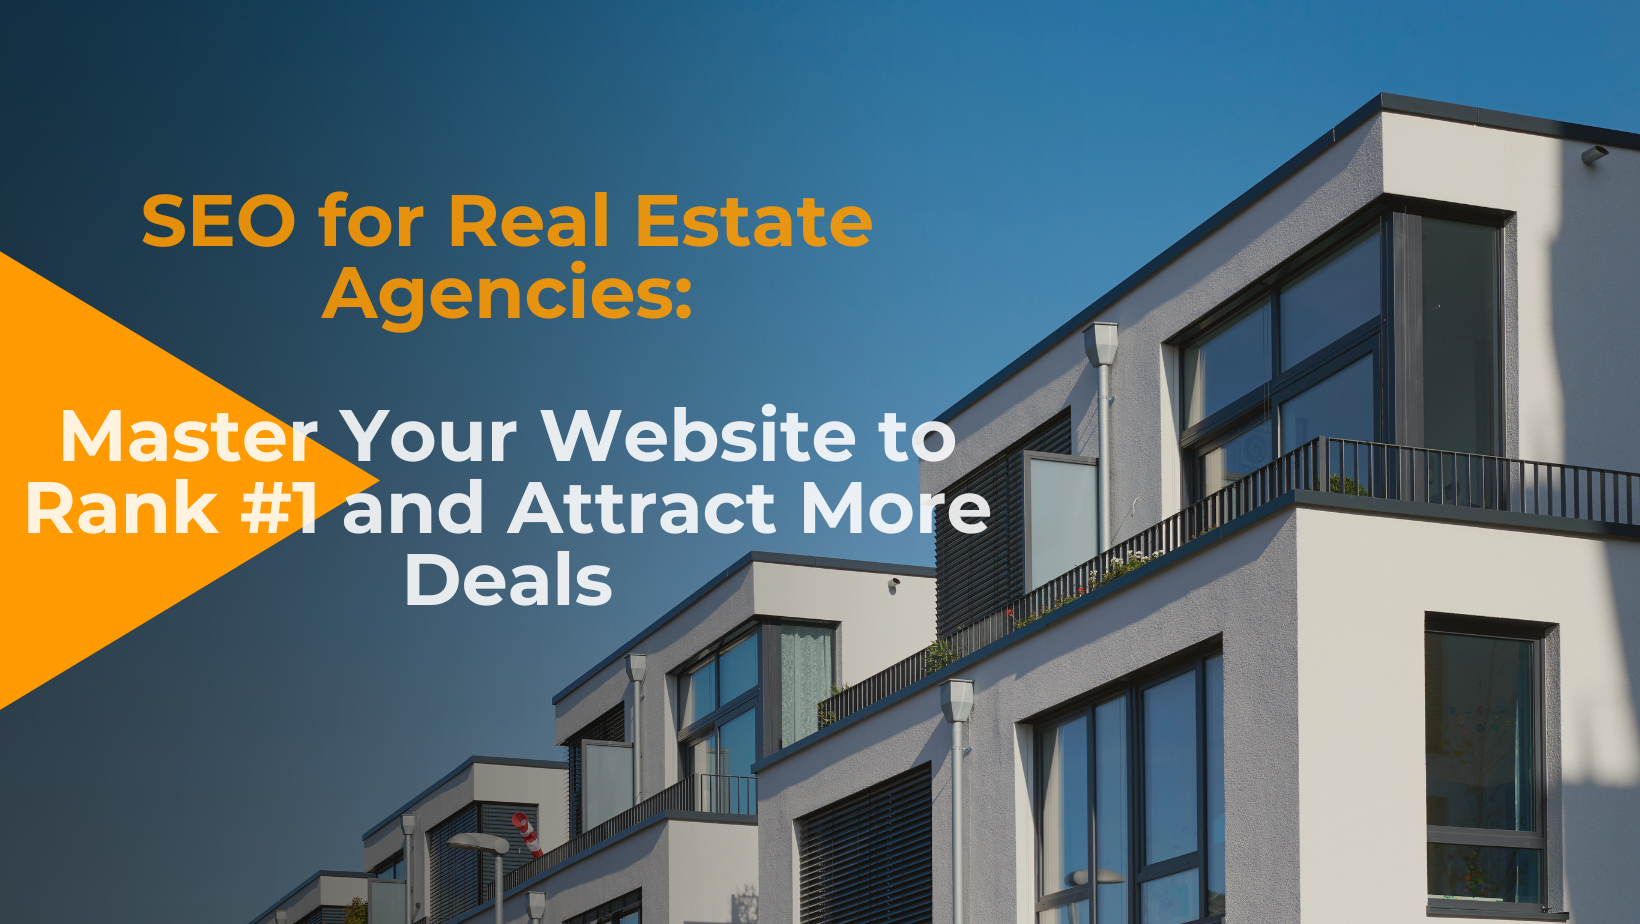 SEO for Real Estate Agencies: Master Your Website to Rank #1 and Attract More Deals